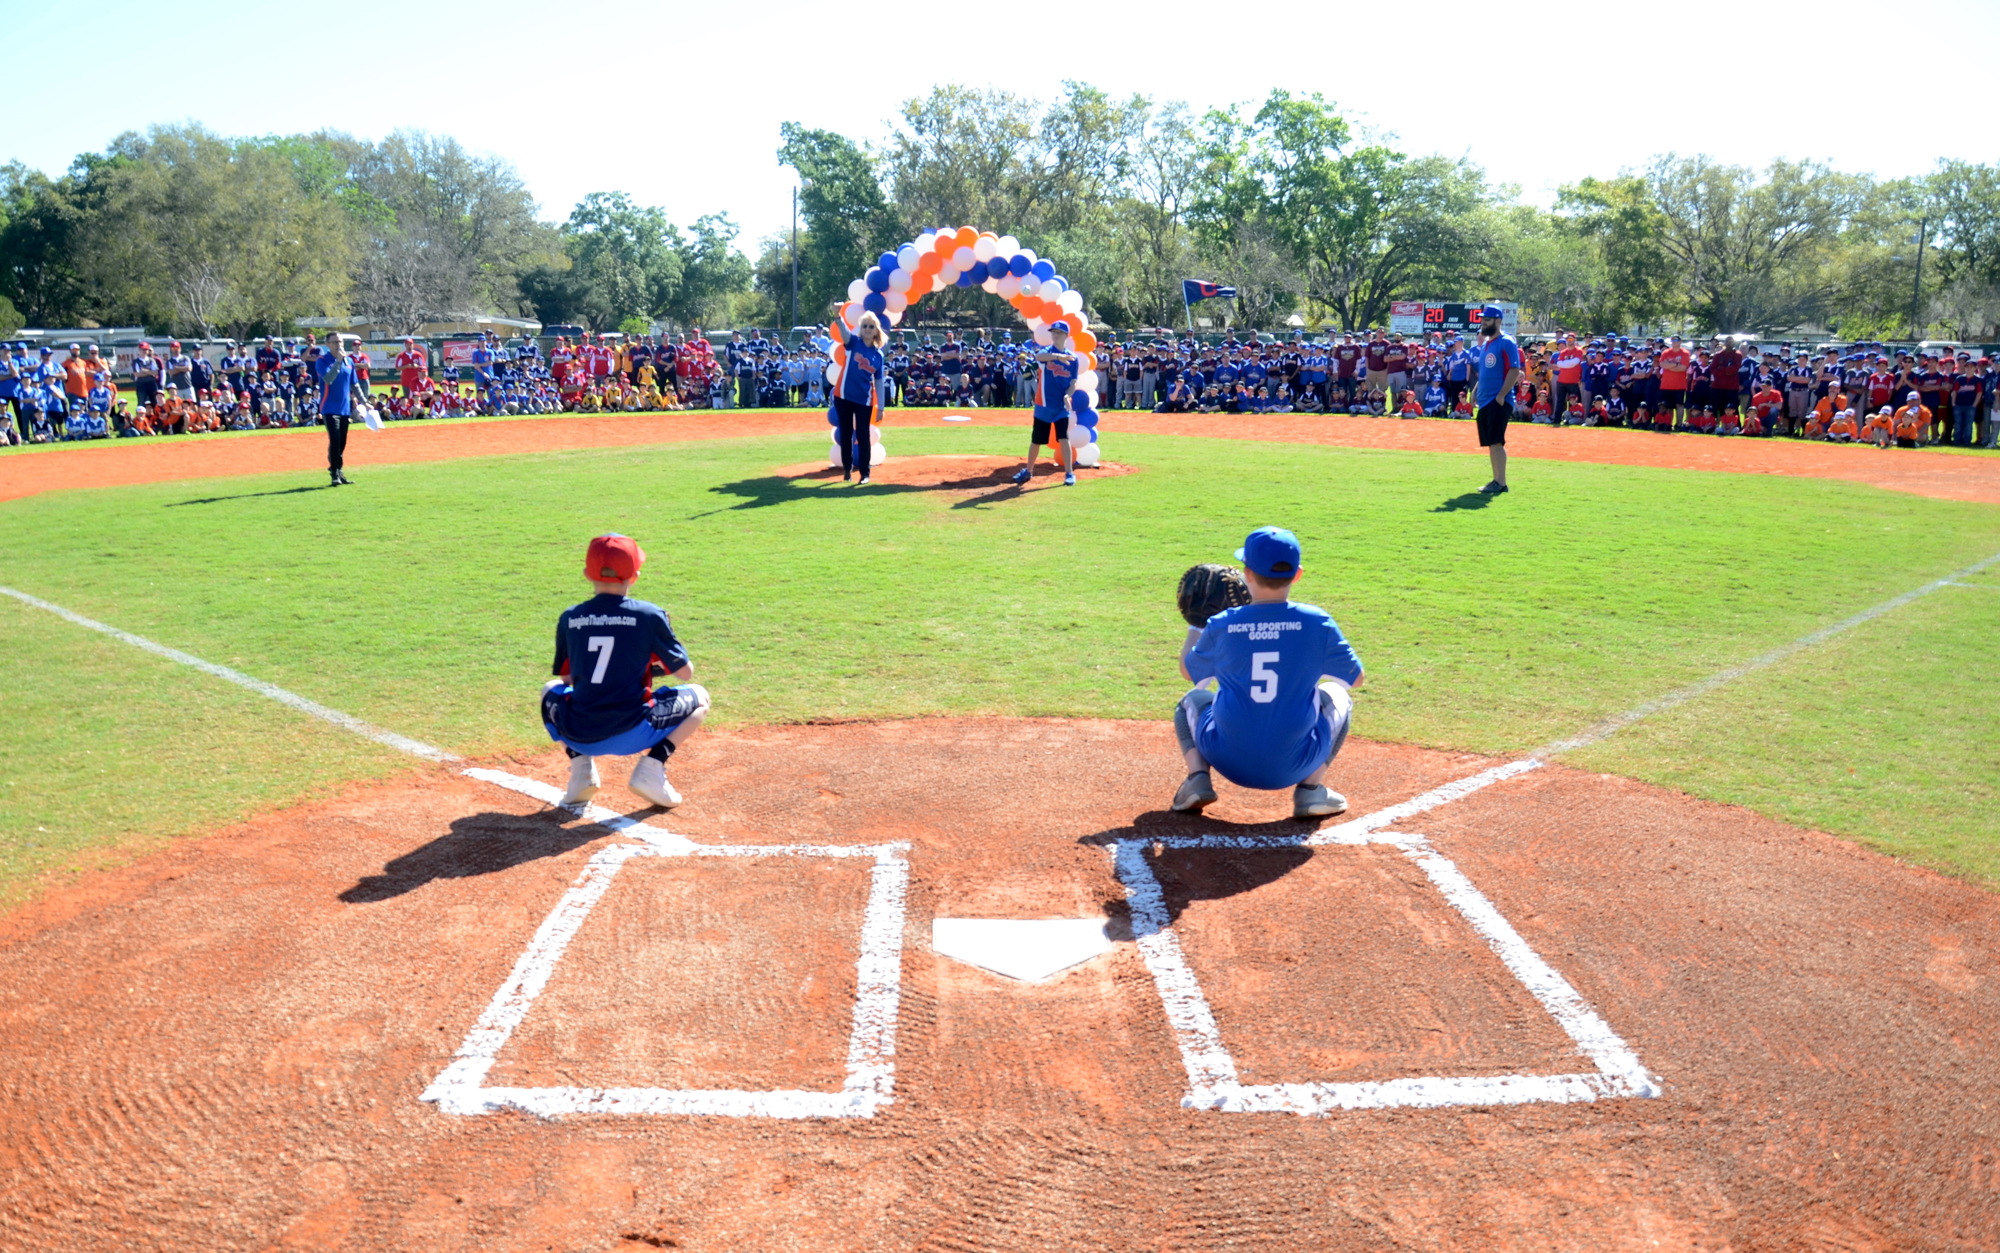 Debbie Dobbs and Breven Walker threw out the first pitch of the season for Winter Garden Little League.